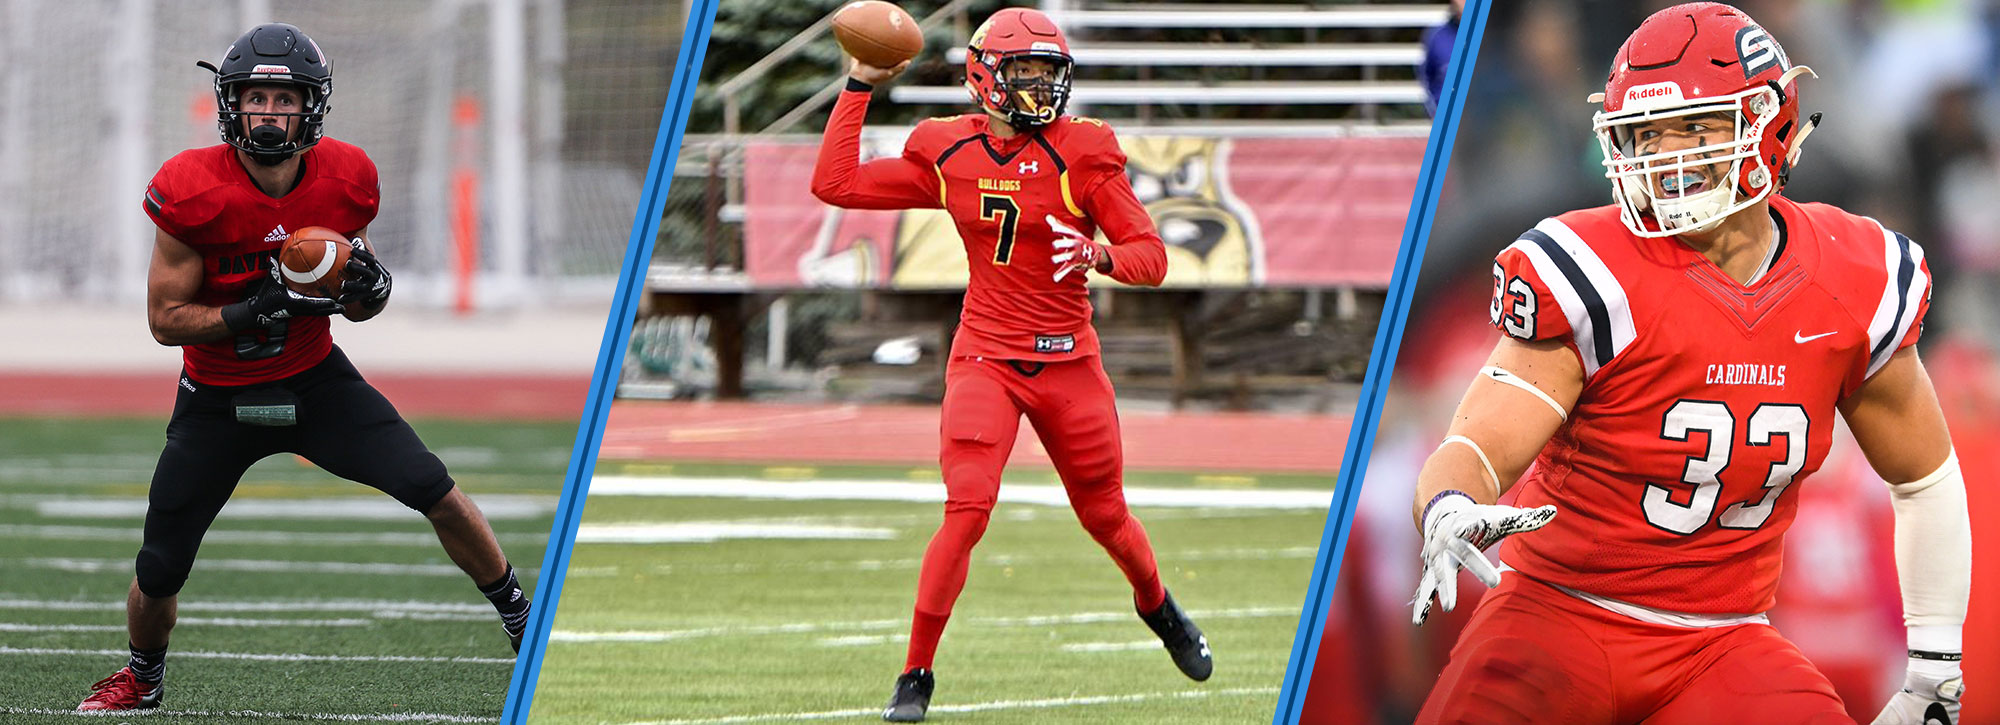 Ferris State's Campbell, Saginaw Valley's Alexander & Davenport's Couturier Honored GLIAC Football Players of the Week